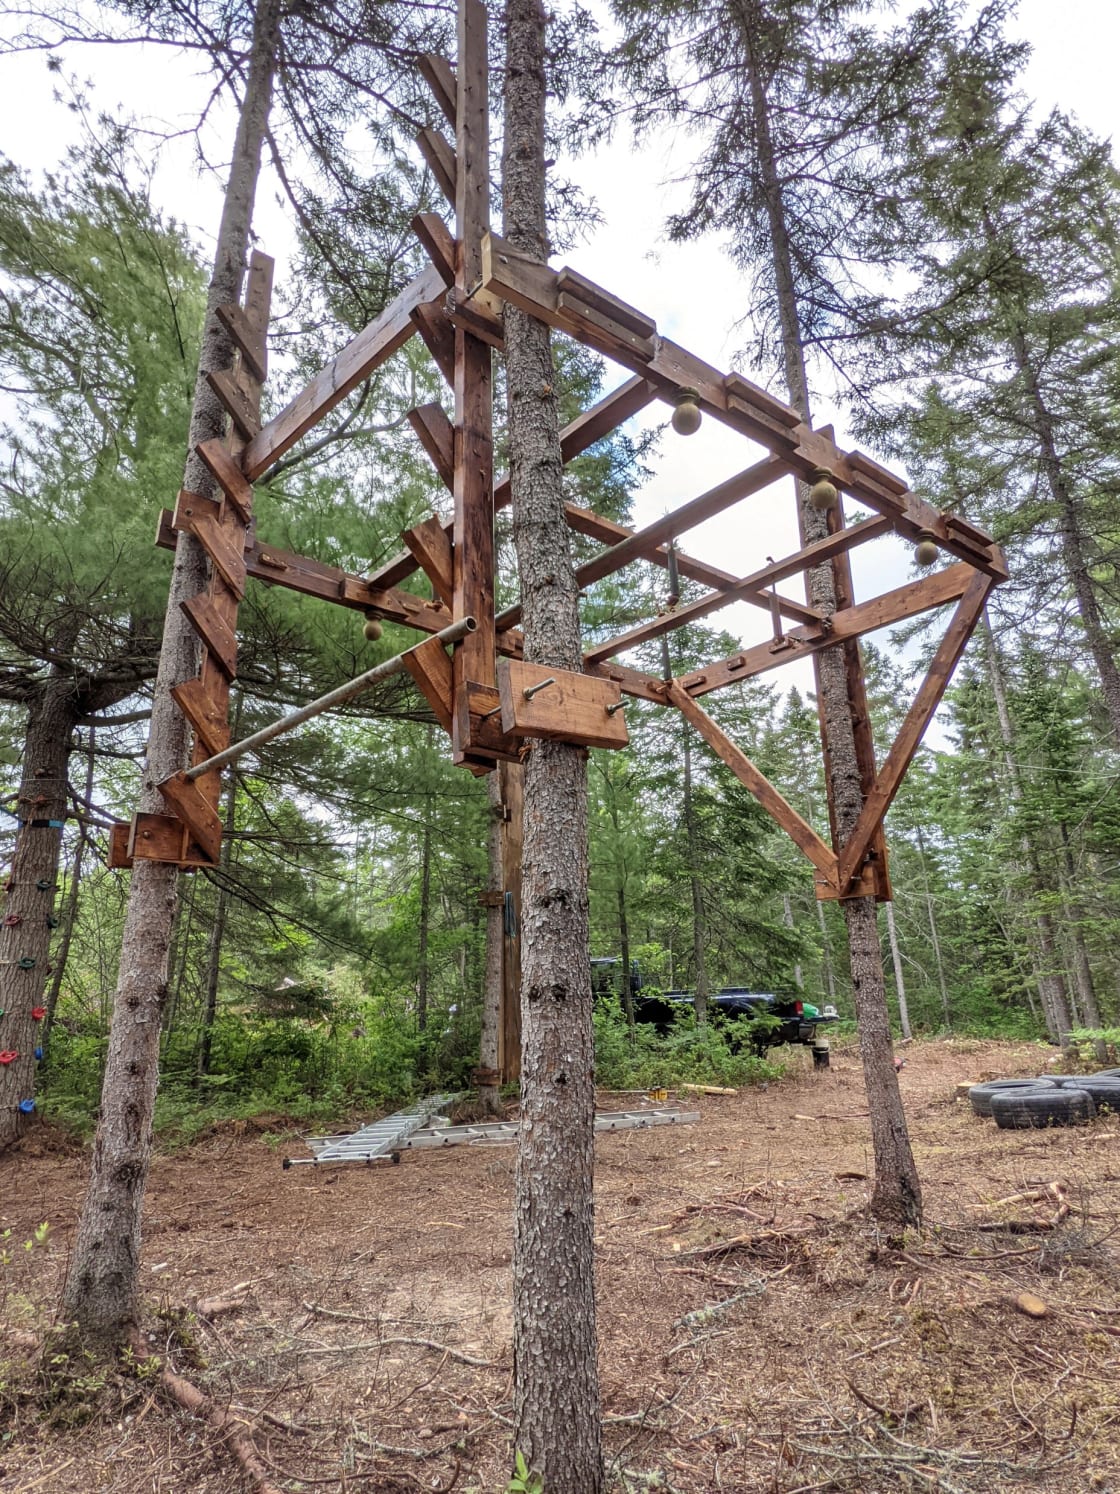 Ninja obstacle course with a salmon ladder